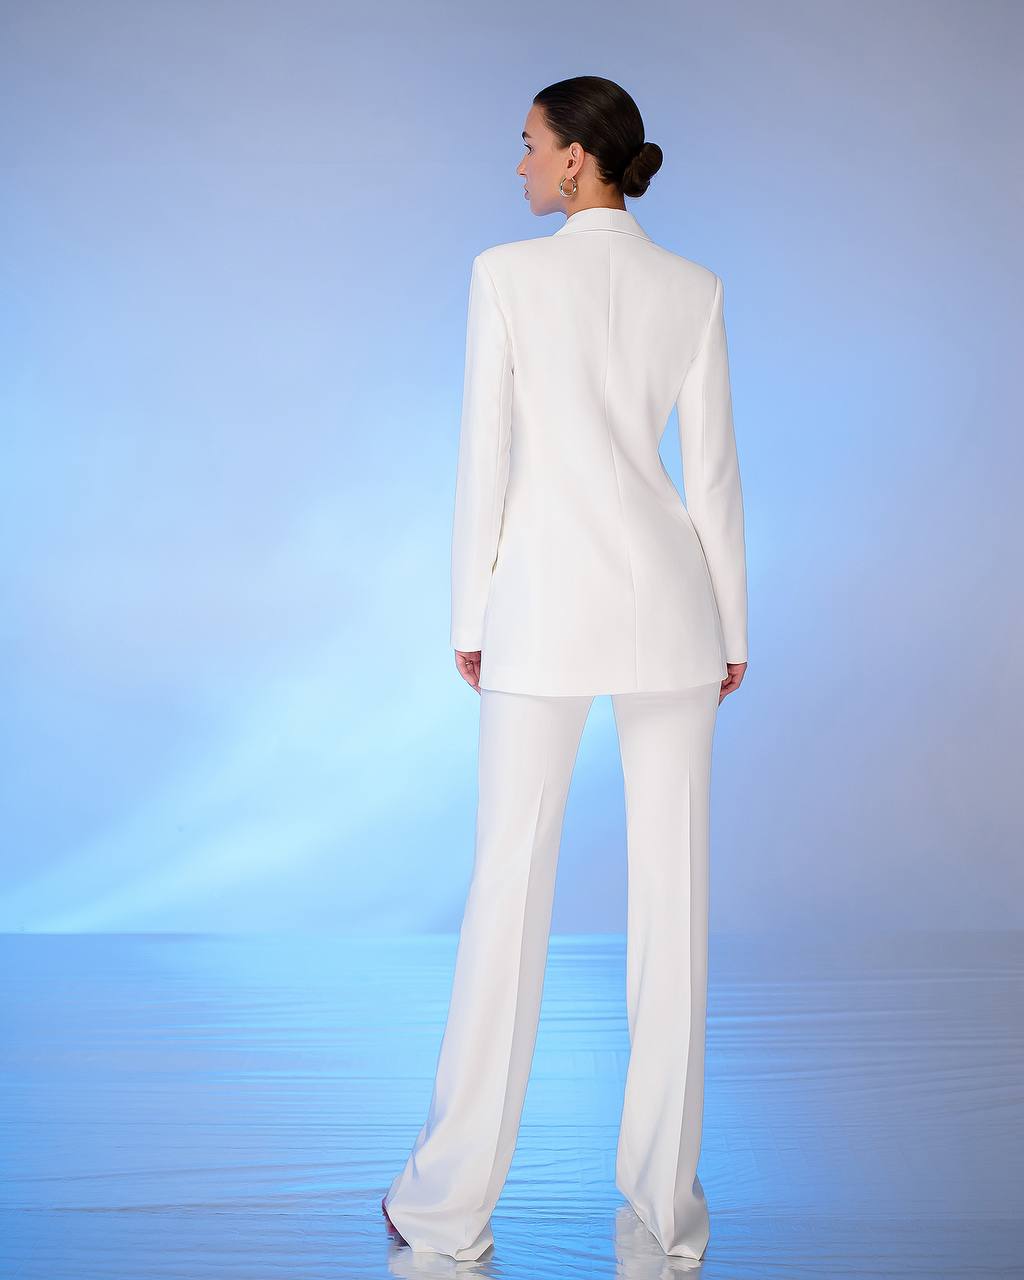 a woman in a white suit standing in water